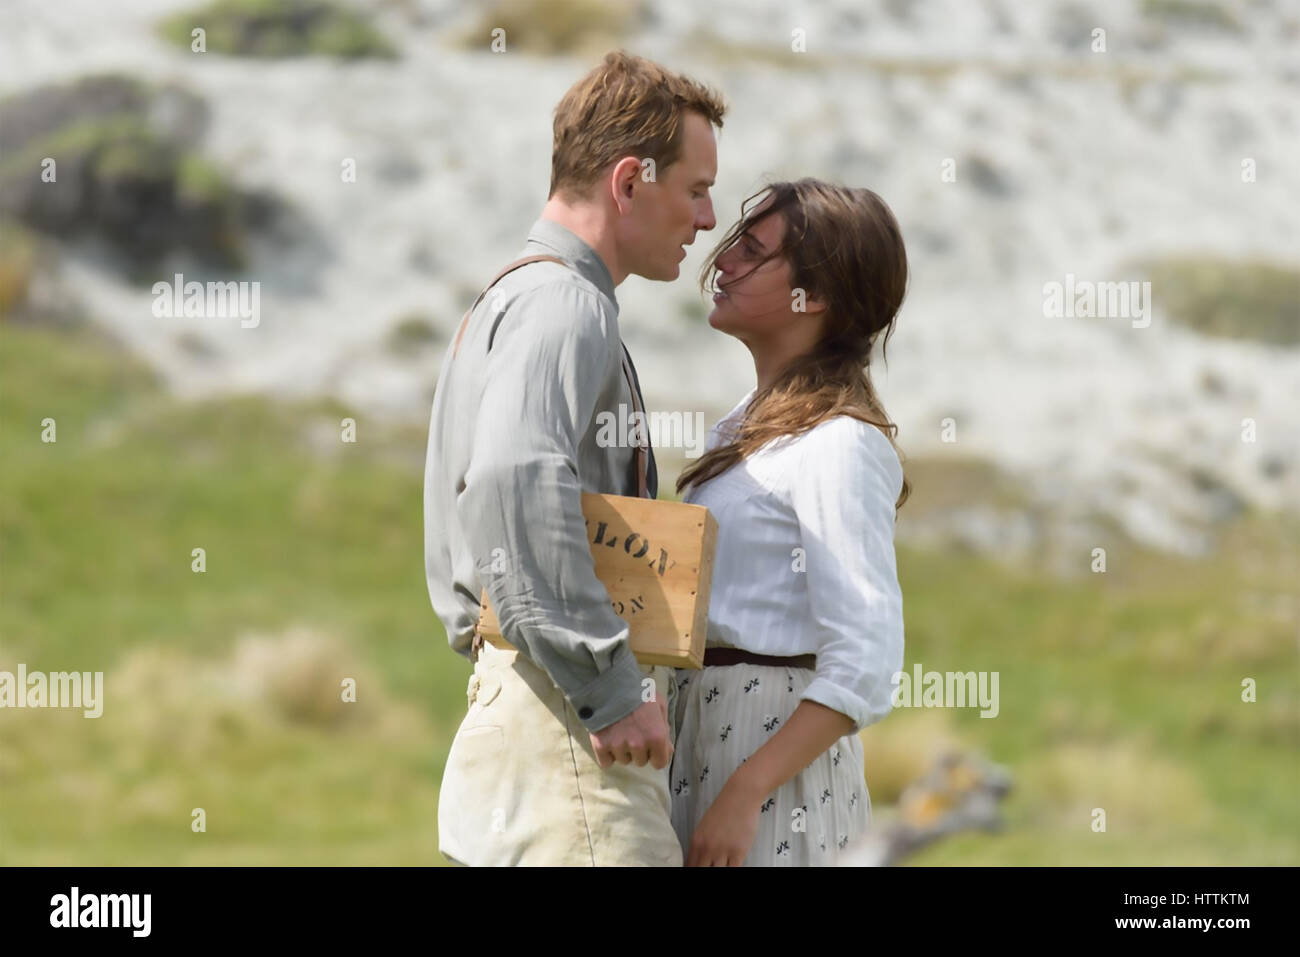 THE LIGHT BETWEEN OCEANS 2016 Heyday Films/DreamWorks production with Alicia Vikander and Michael Fassbender Stock Photo